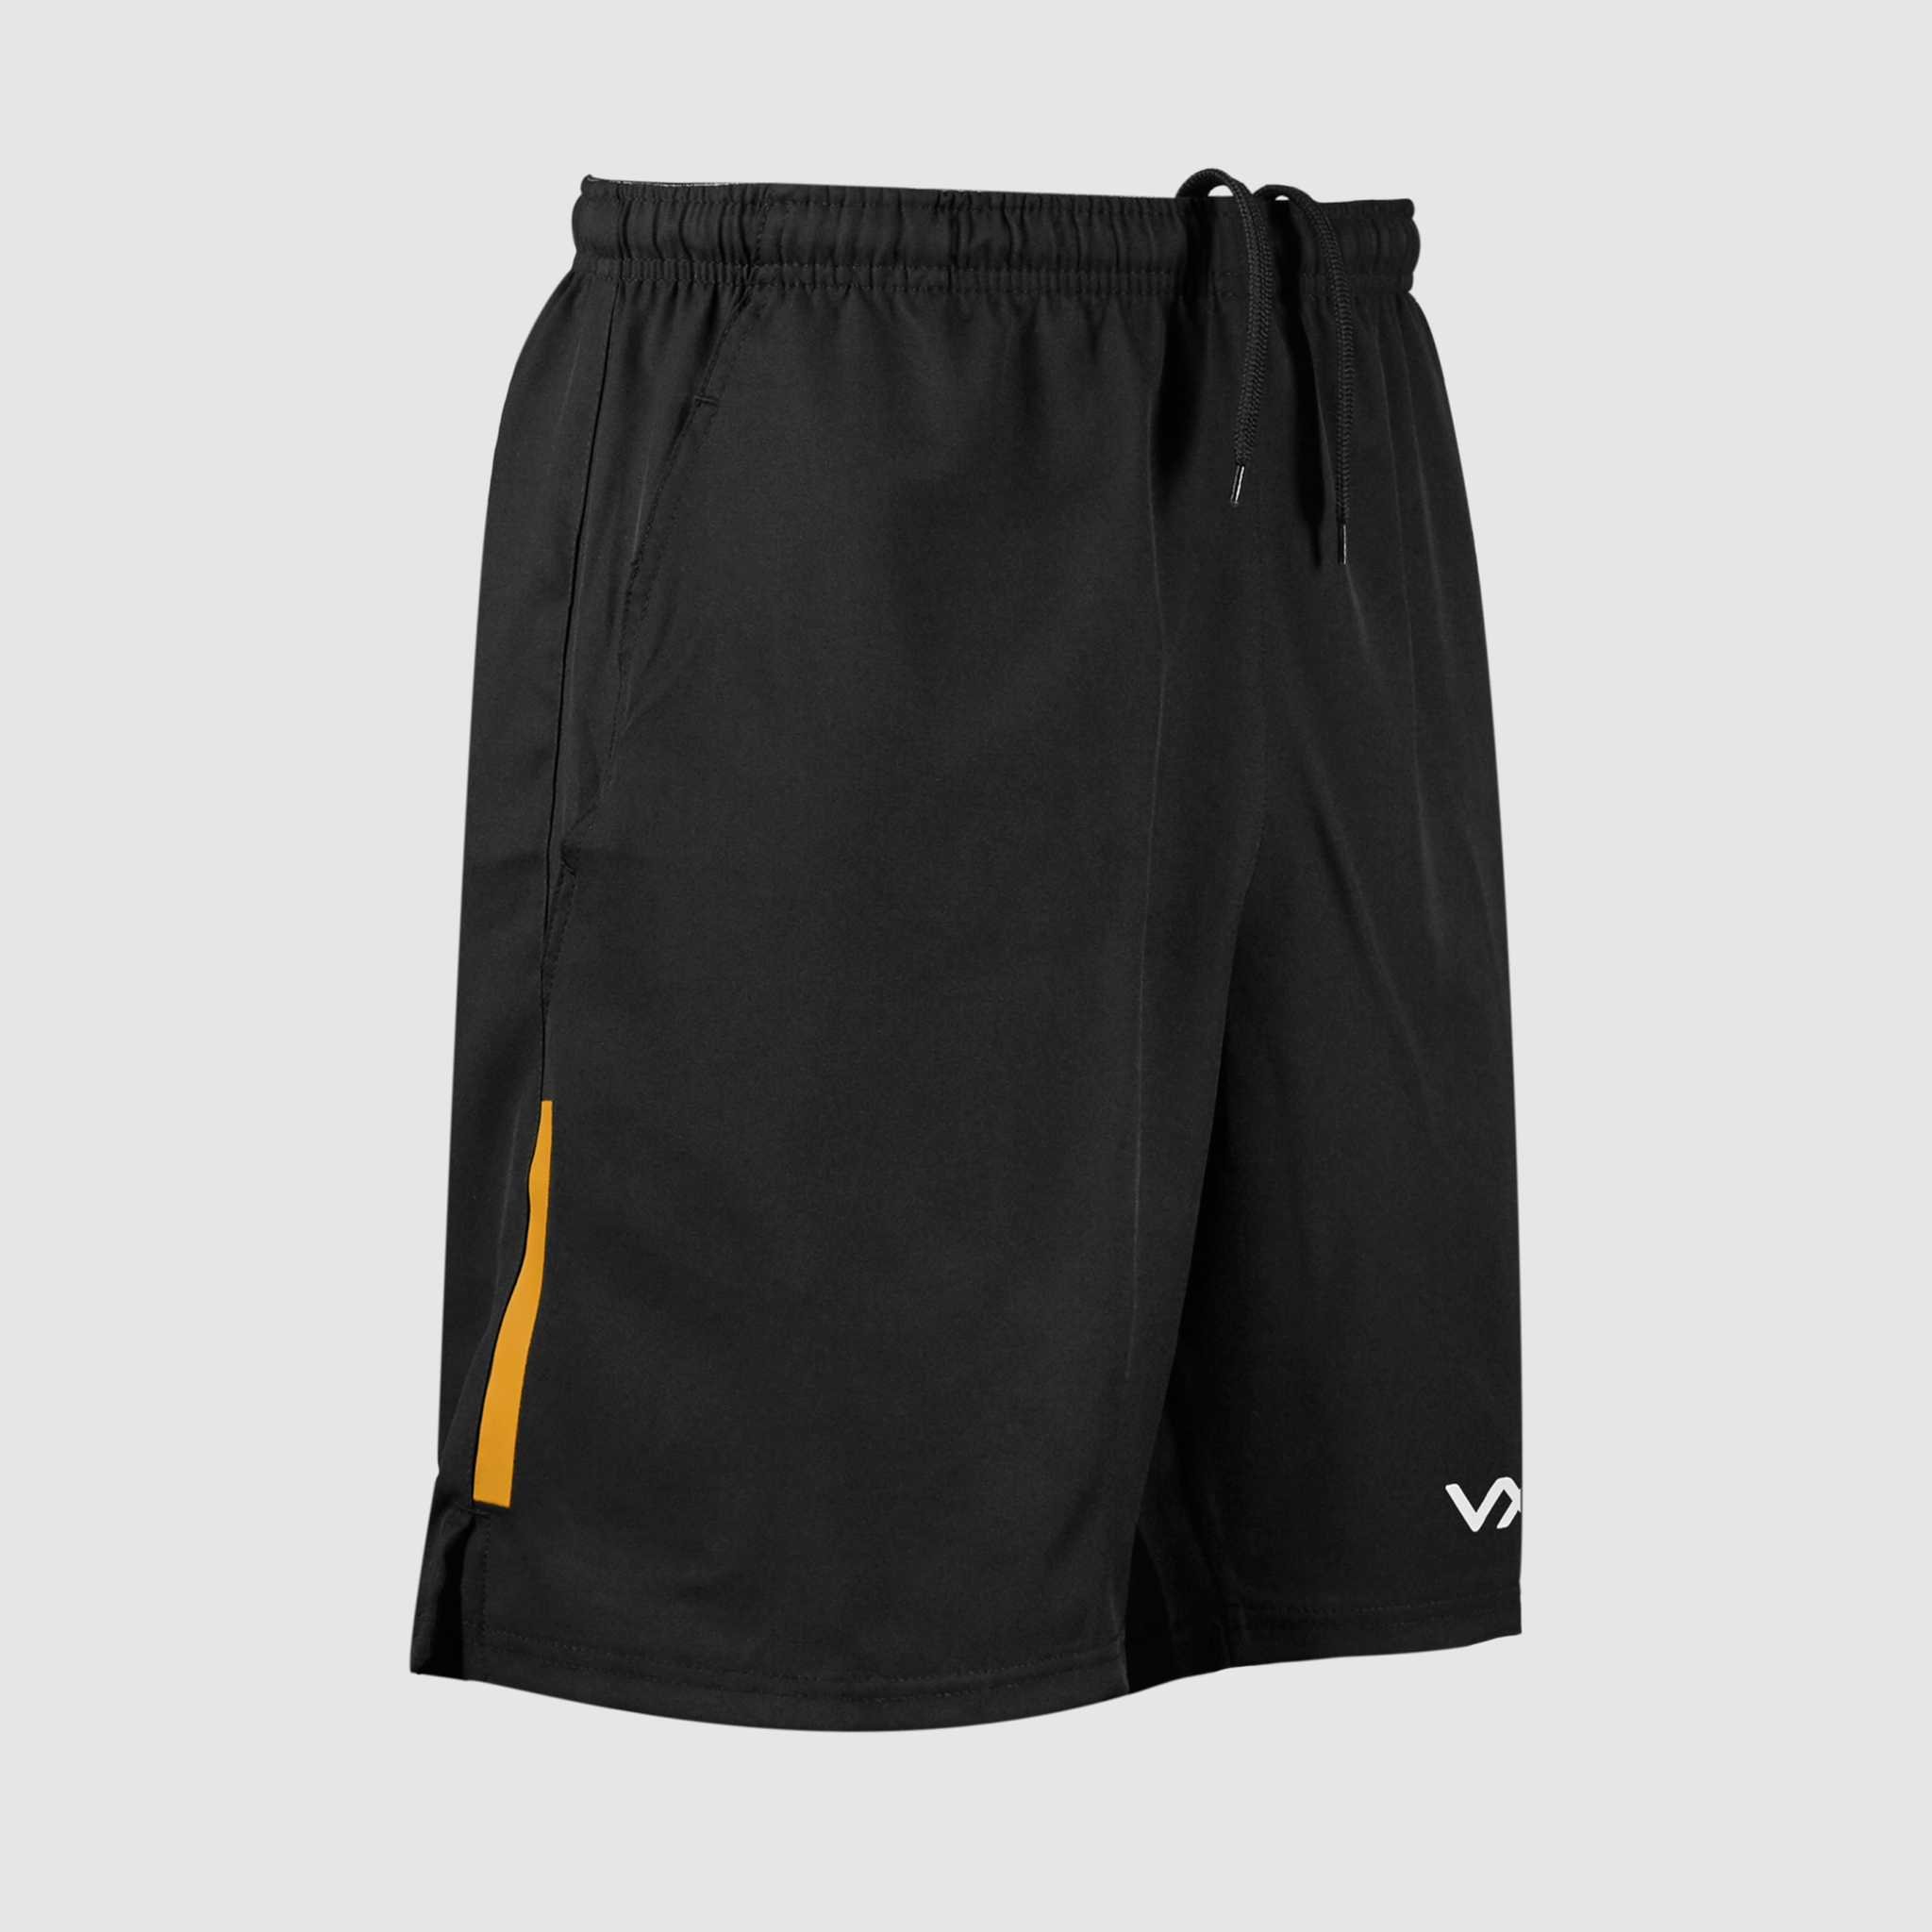 Fortis Youth Travel Shorts Black/Amber